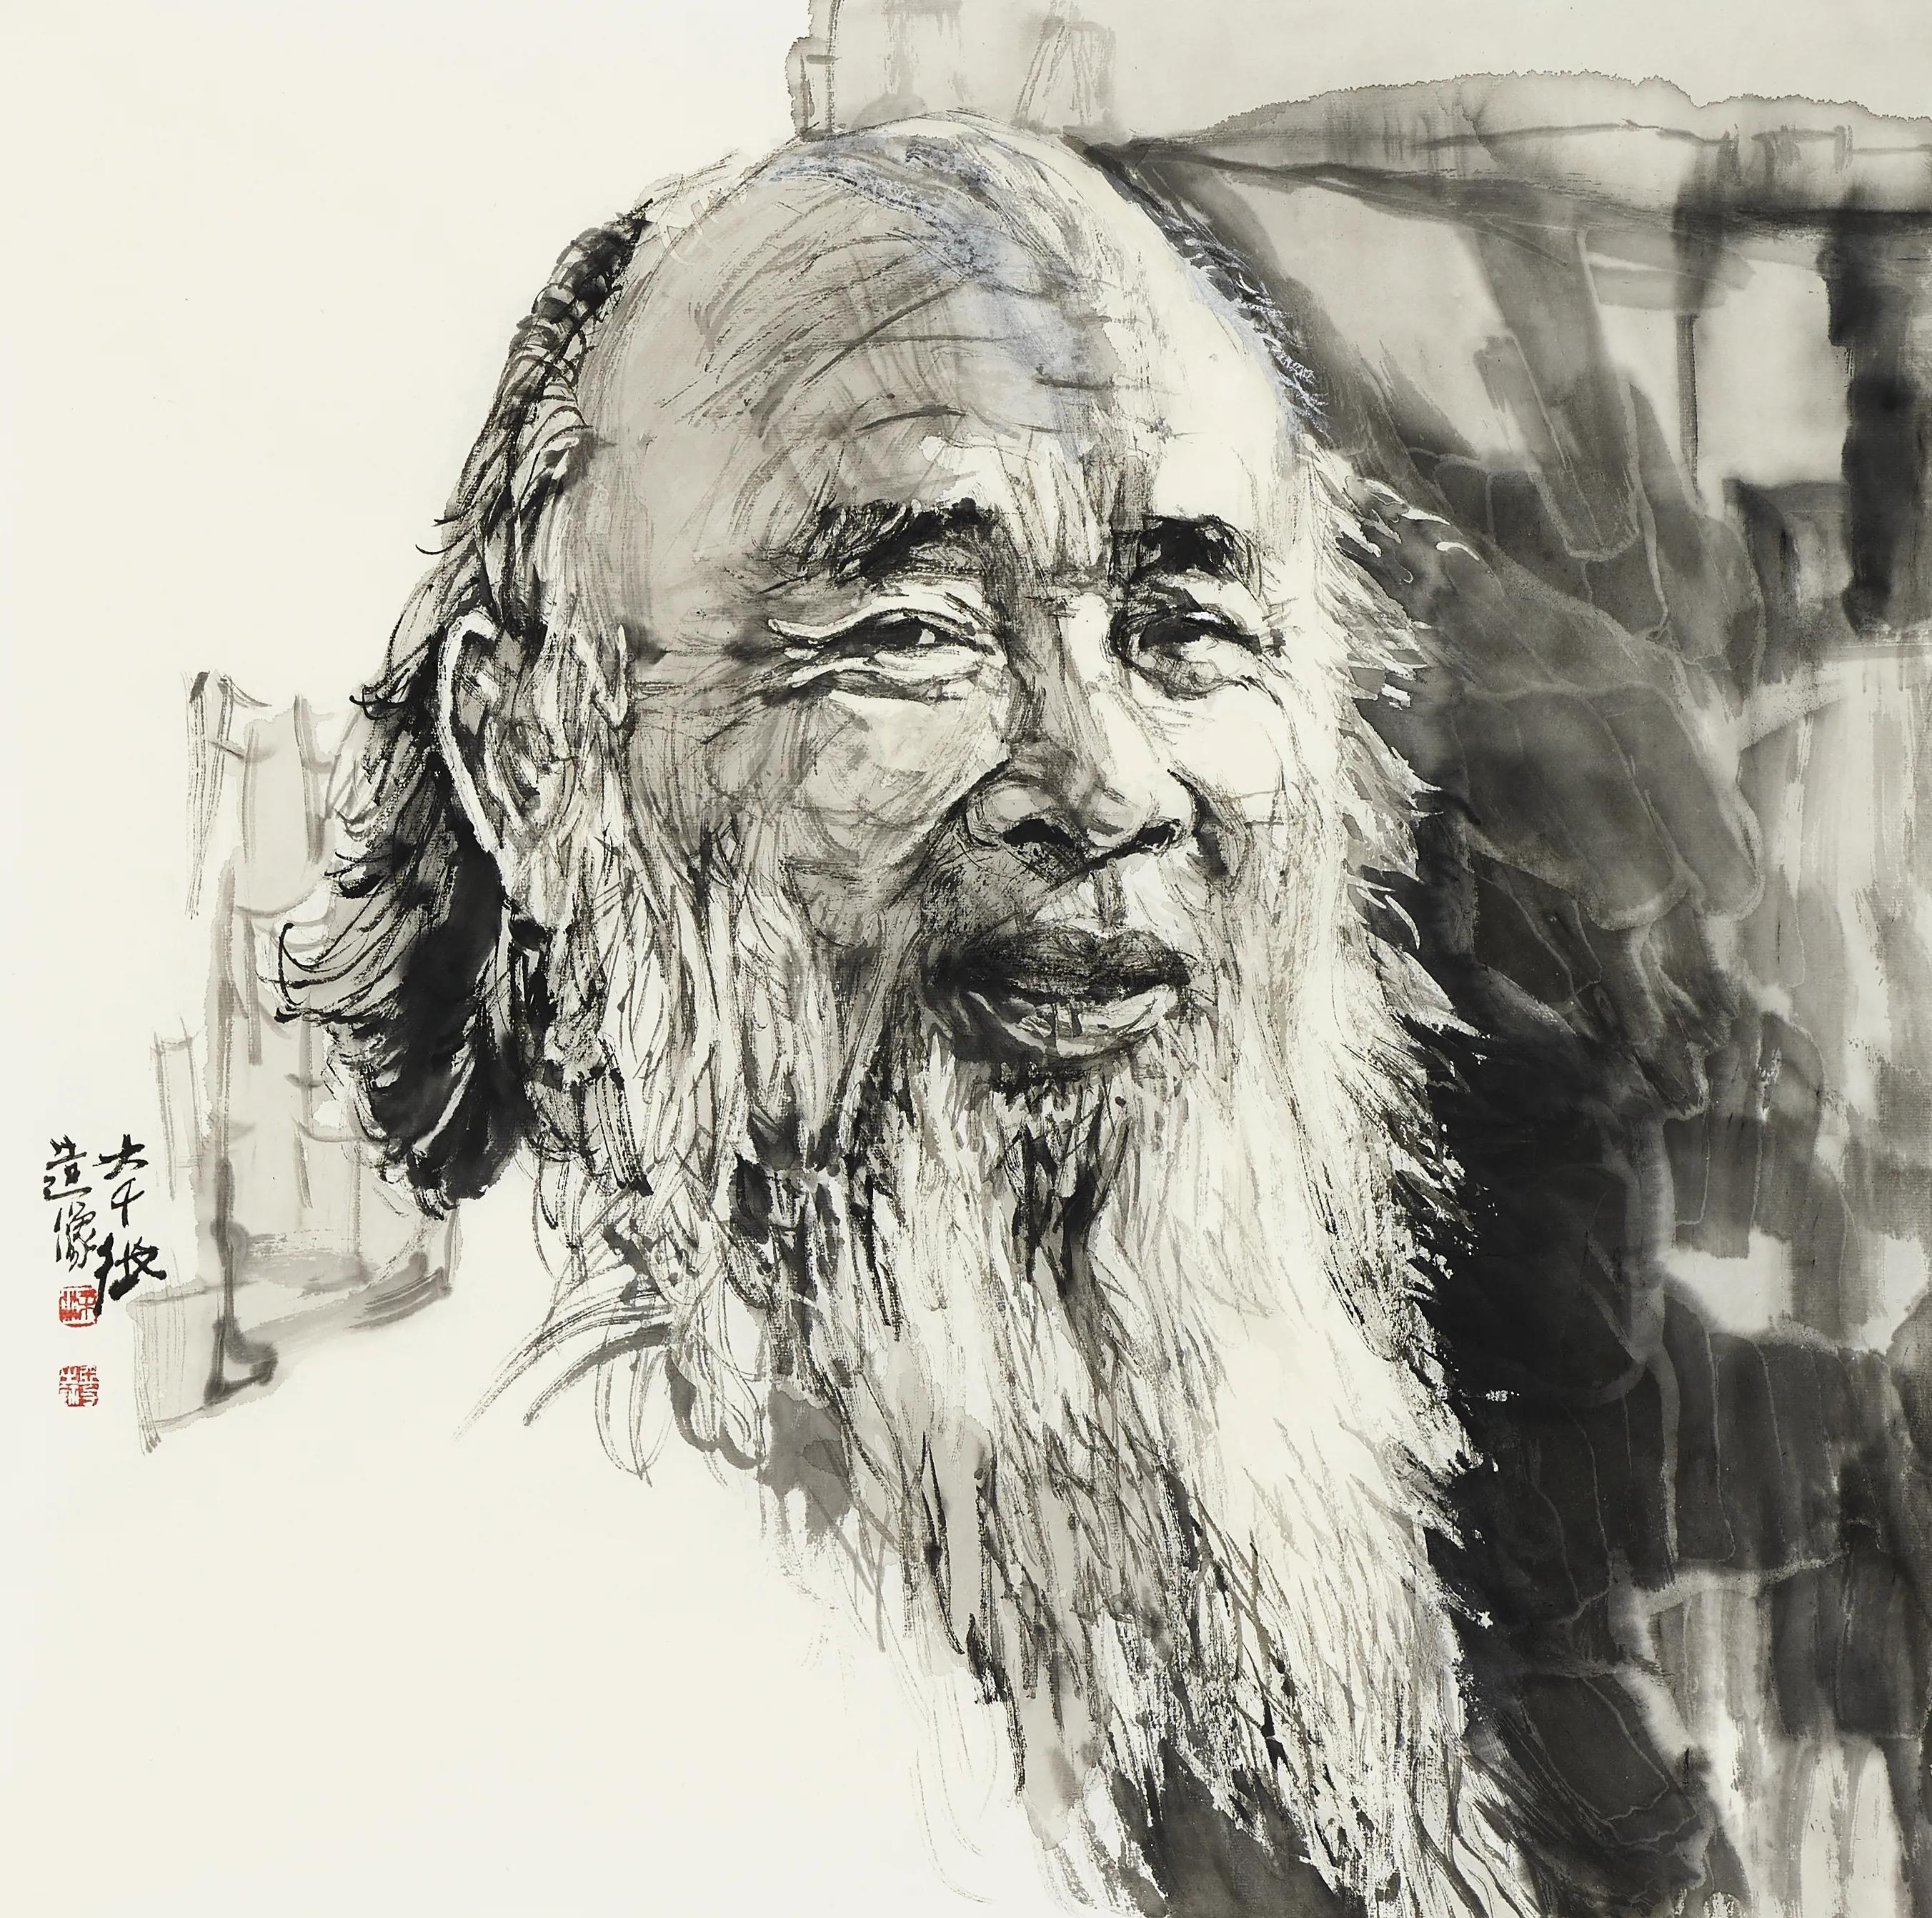 Chongqing|Liang Yali|Chinese Painting|Sketch Techniques|Painting the ...